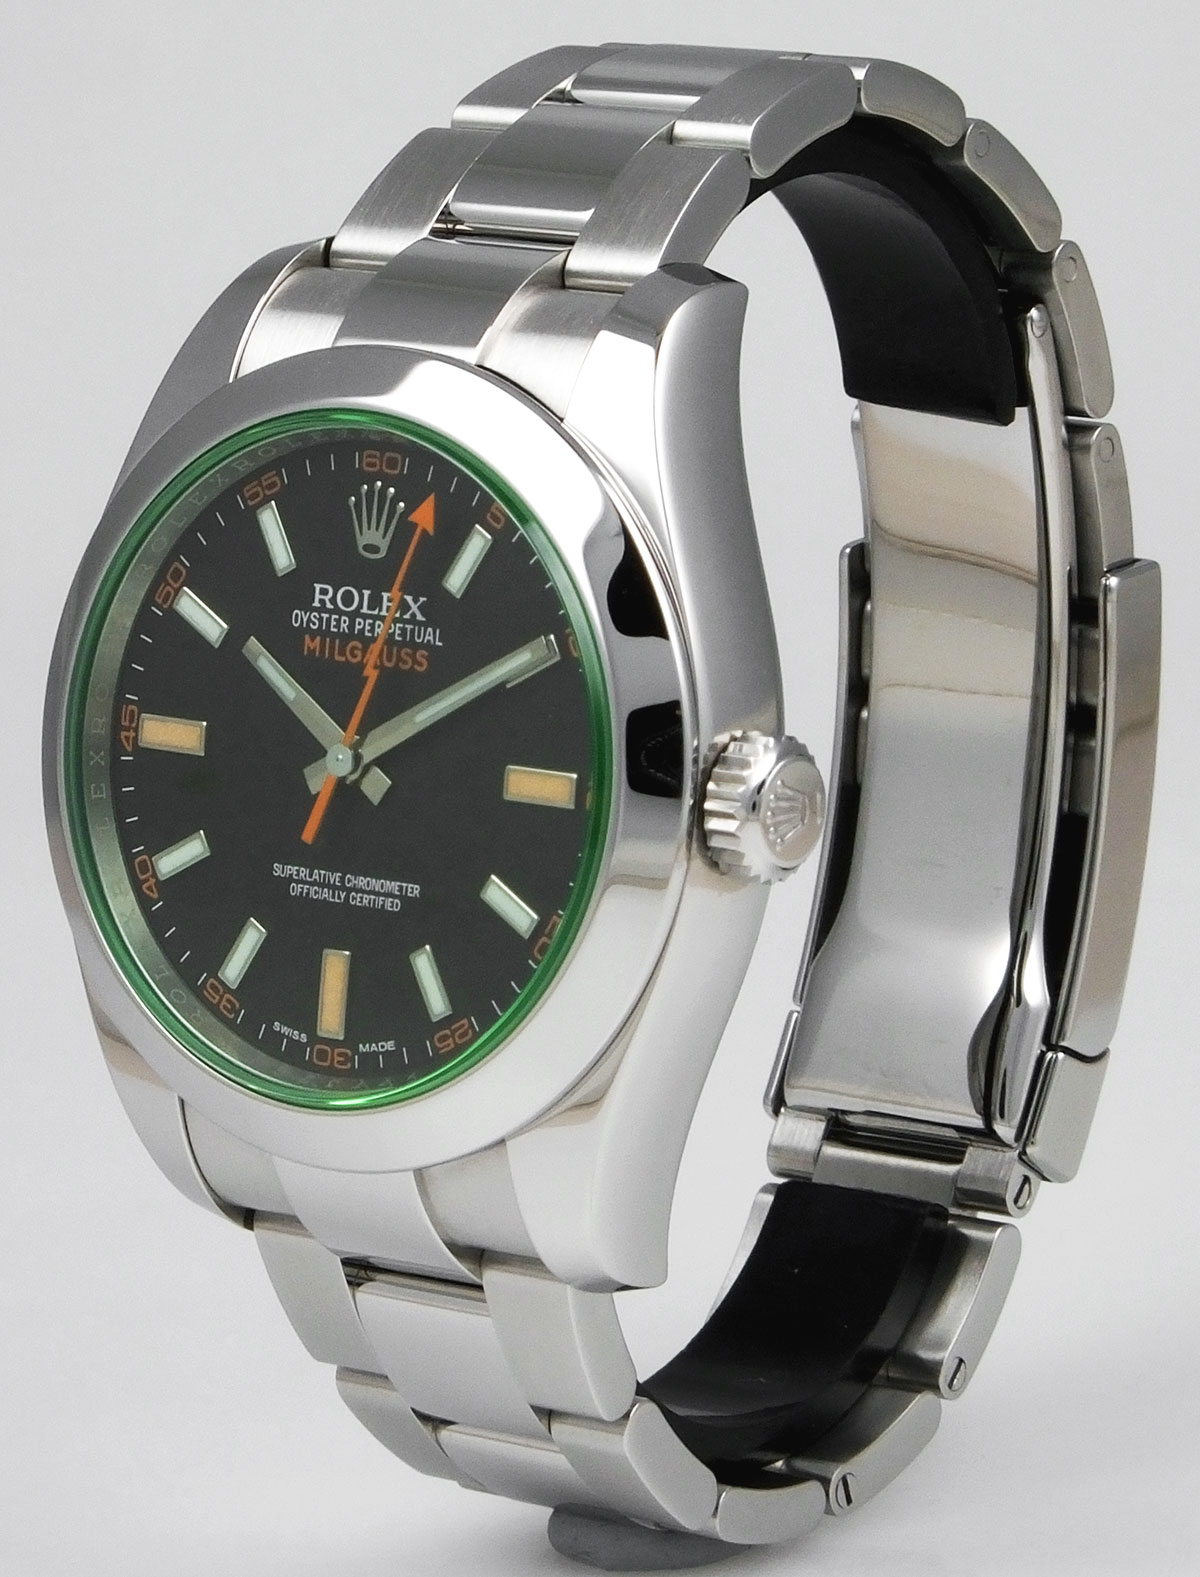 Gents Rolex Oyster Perpetual Milgauss 116400GV - Black Dial Green Glass ...